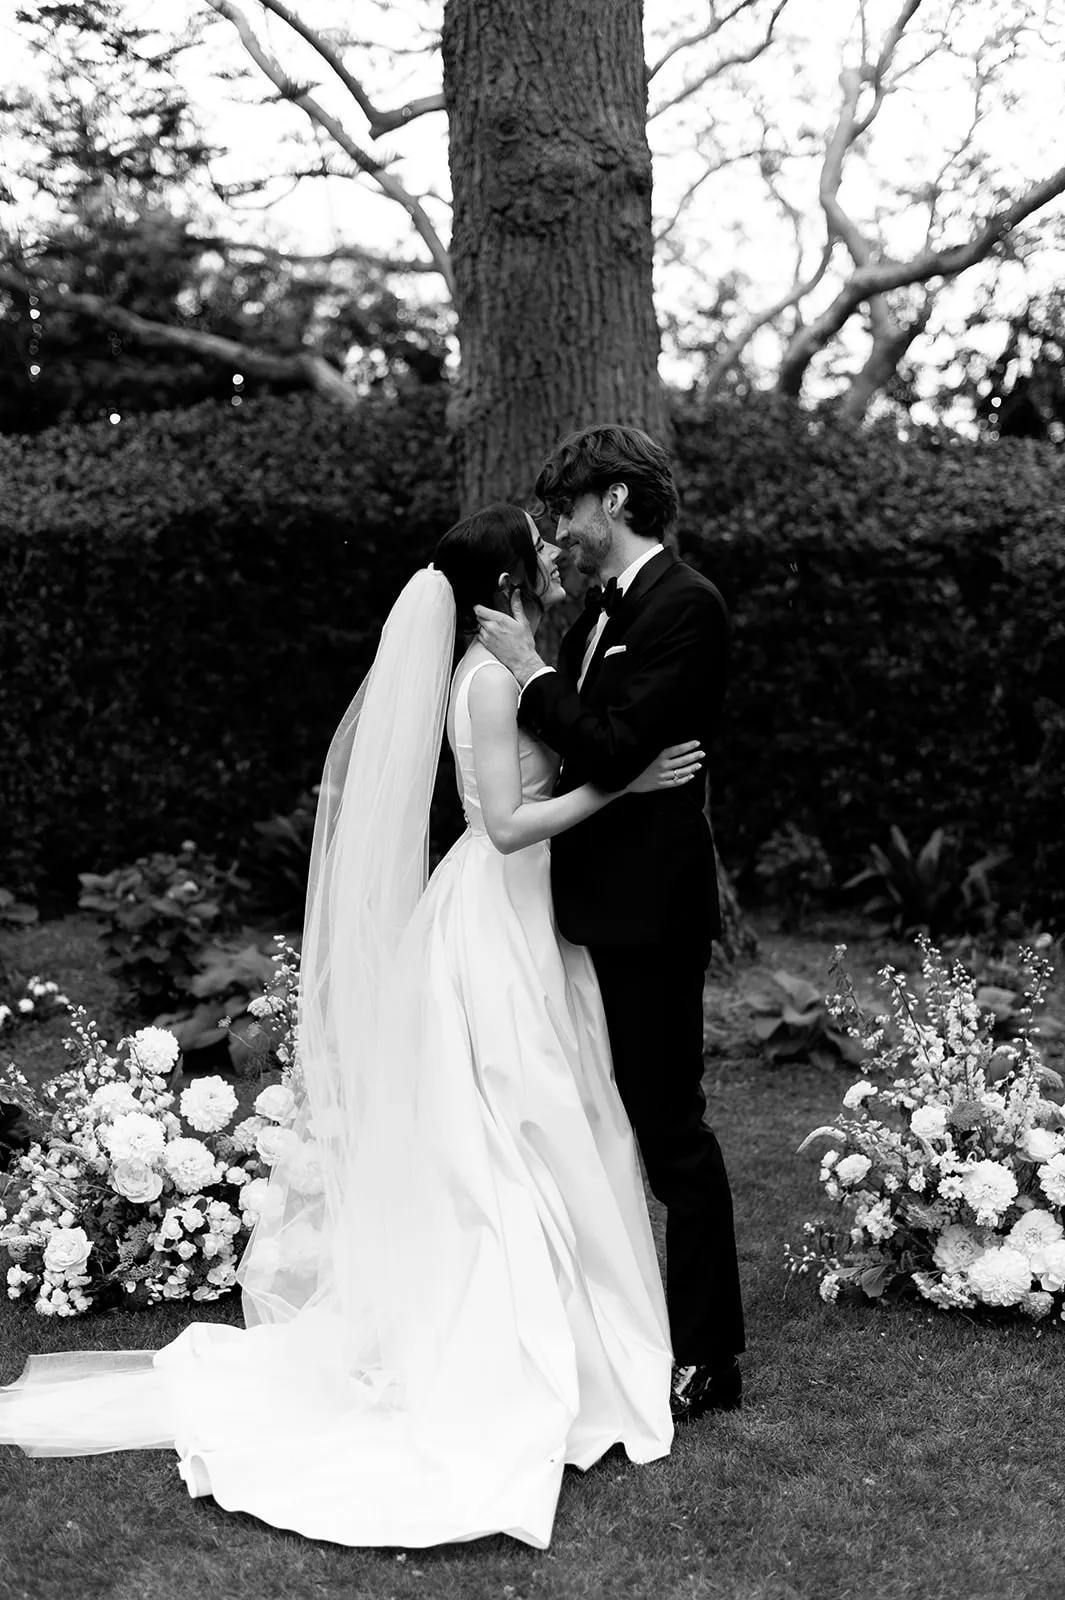 A bride and groom stand embracing in an outdoor setting. The bride wears a flowing white gown with a long veil, and the groom is dressed in a black tuxedo. They are surrounded by floral arrangements and greenery, with a large tree trunk in the background.